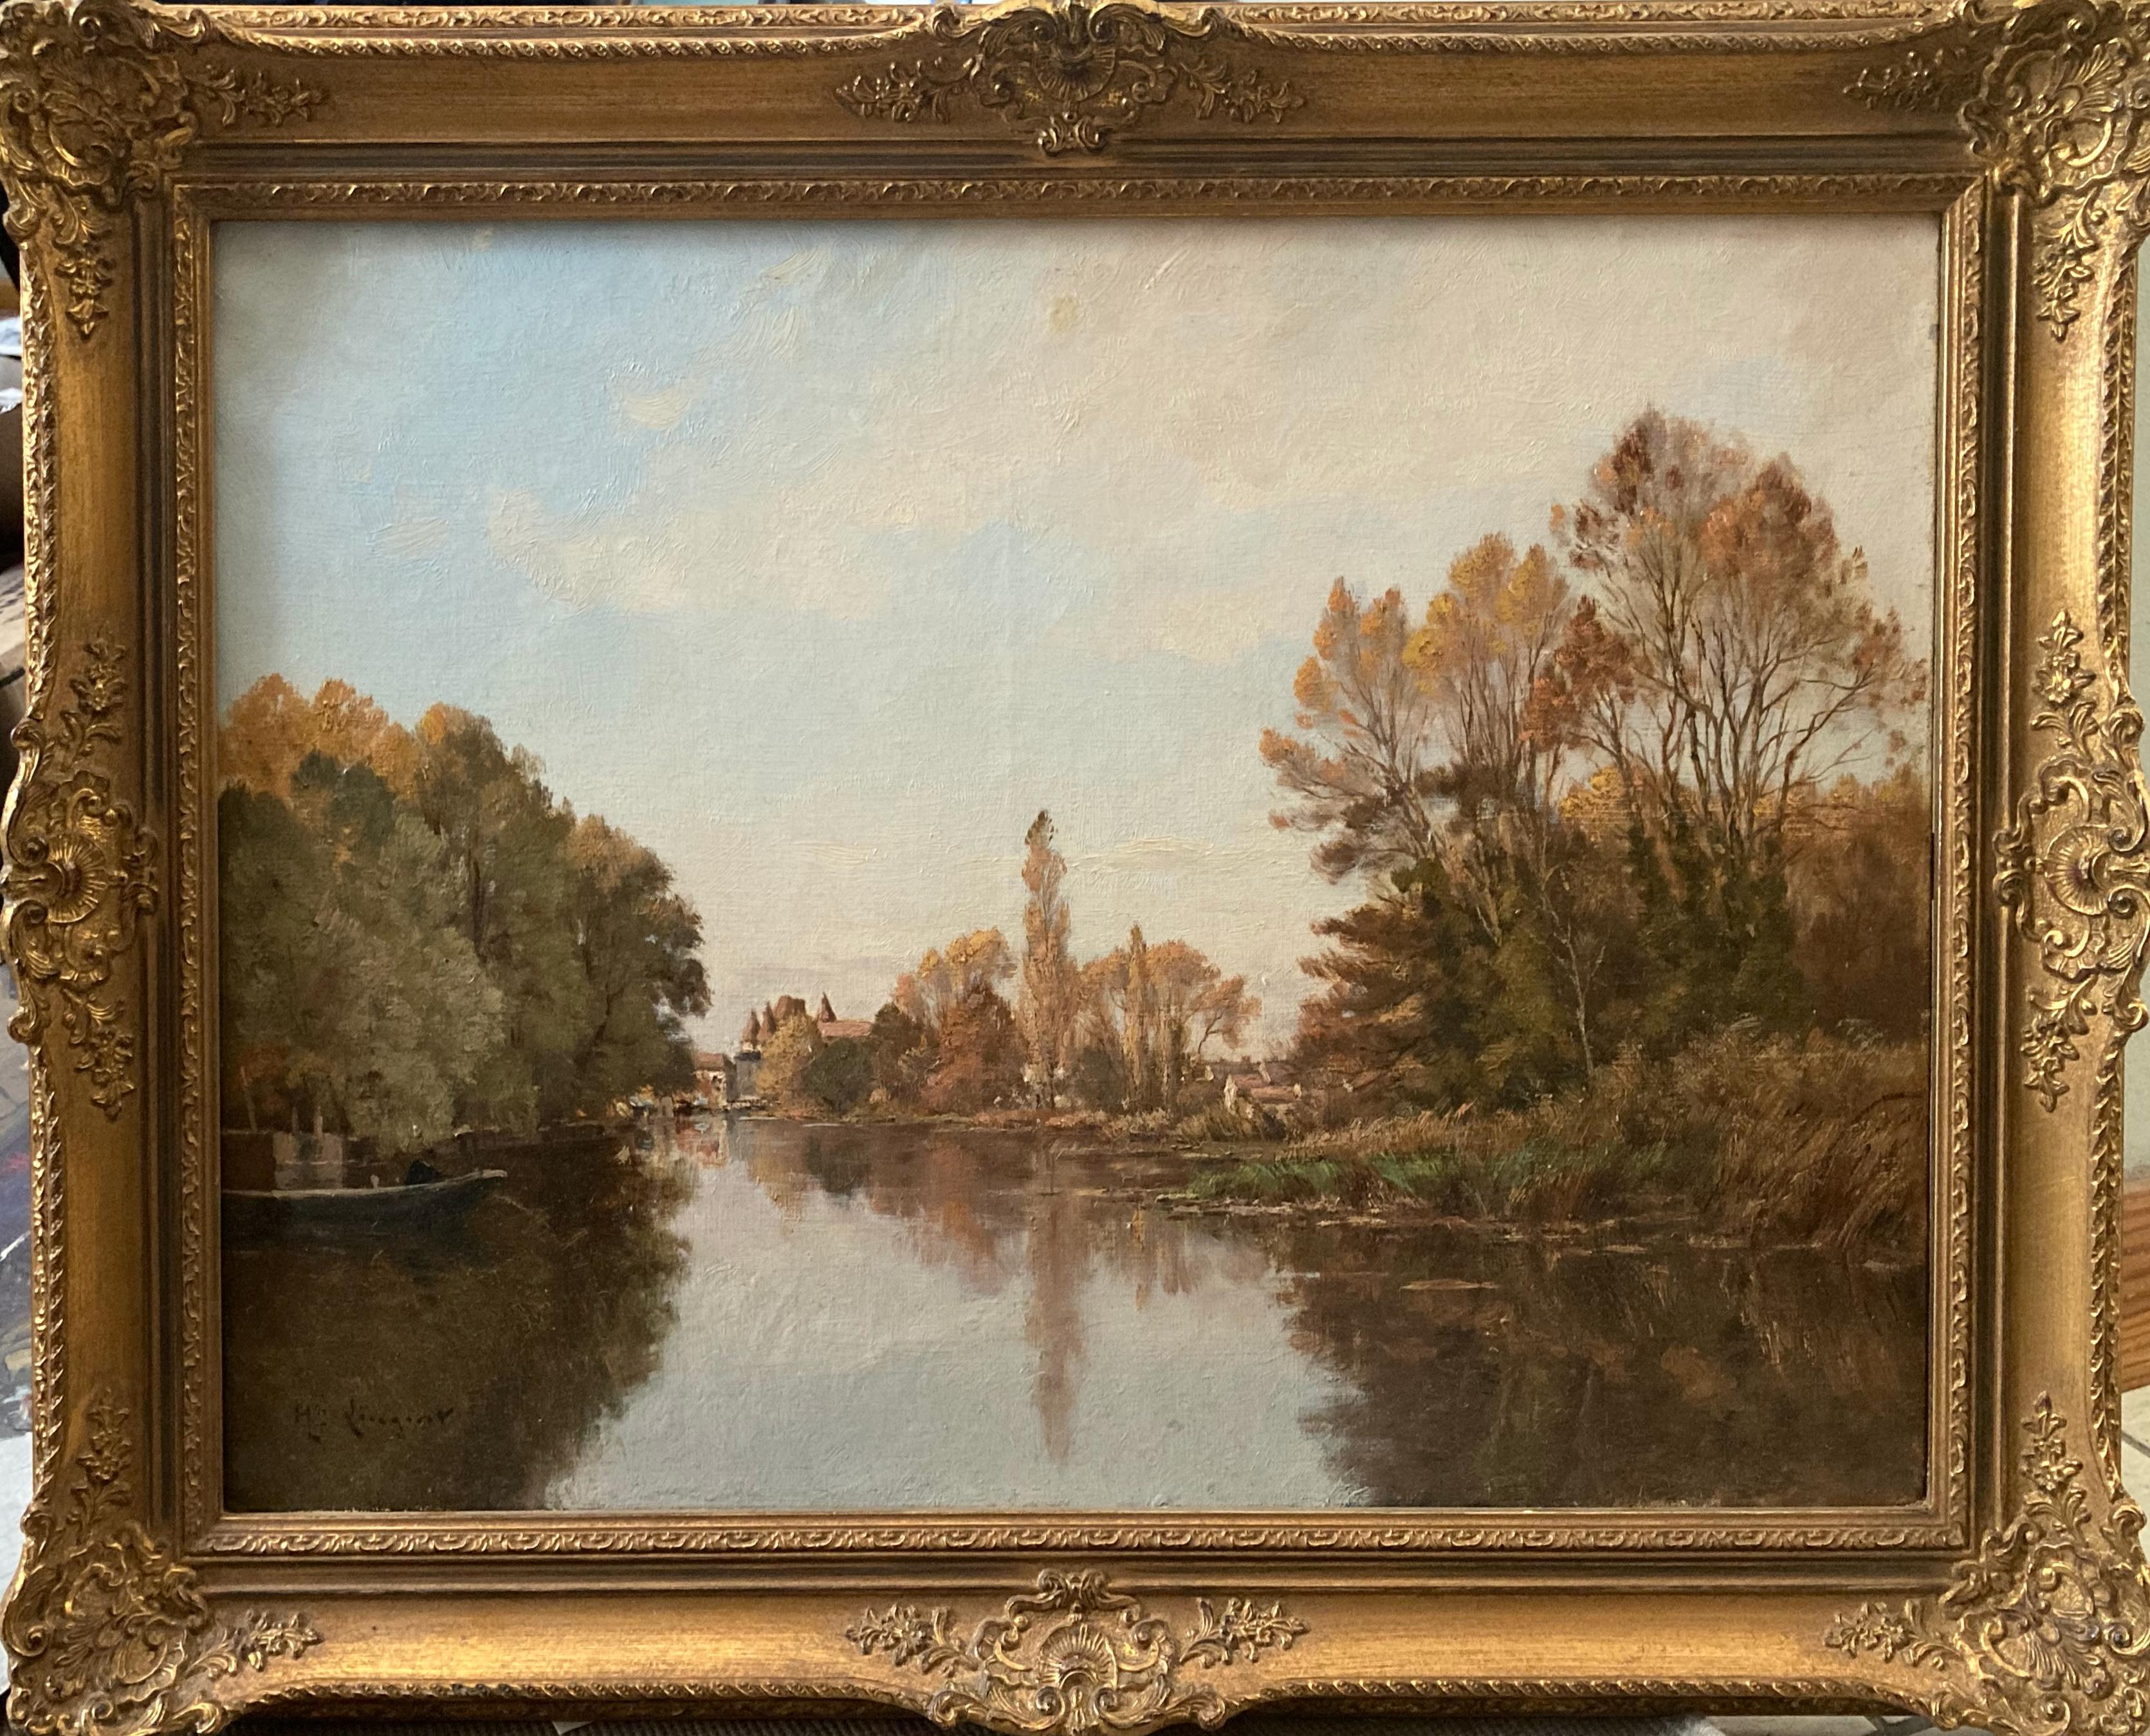 I cannot find anywhere the information that came with this gorgeous 19th-century European landscape when I bought it. It is signed, but I can't make out the signature. So it is what it is: a beautifully rendered depiction of a lake with cottages and